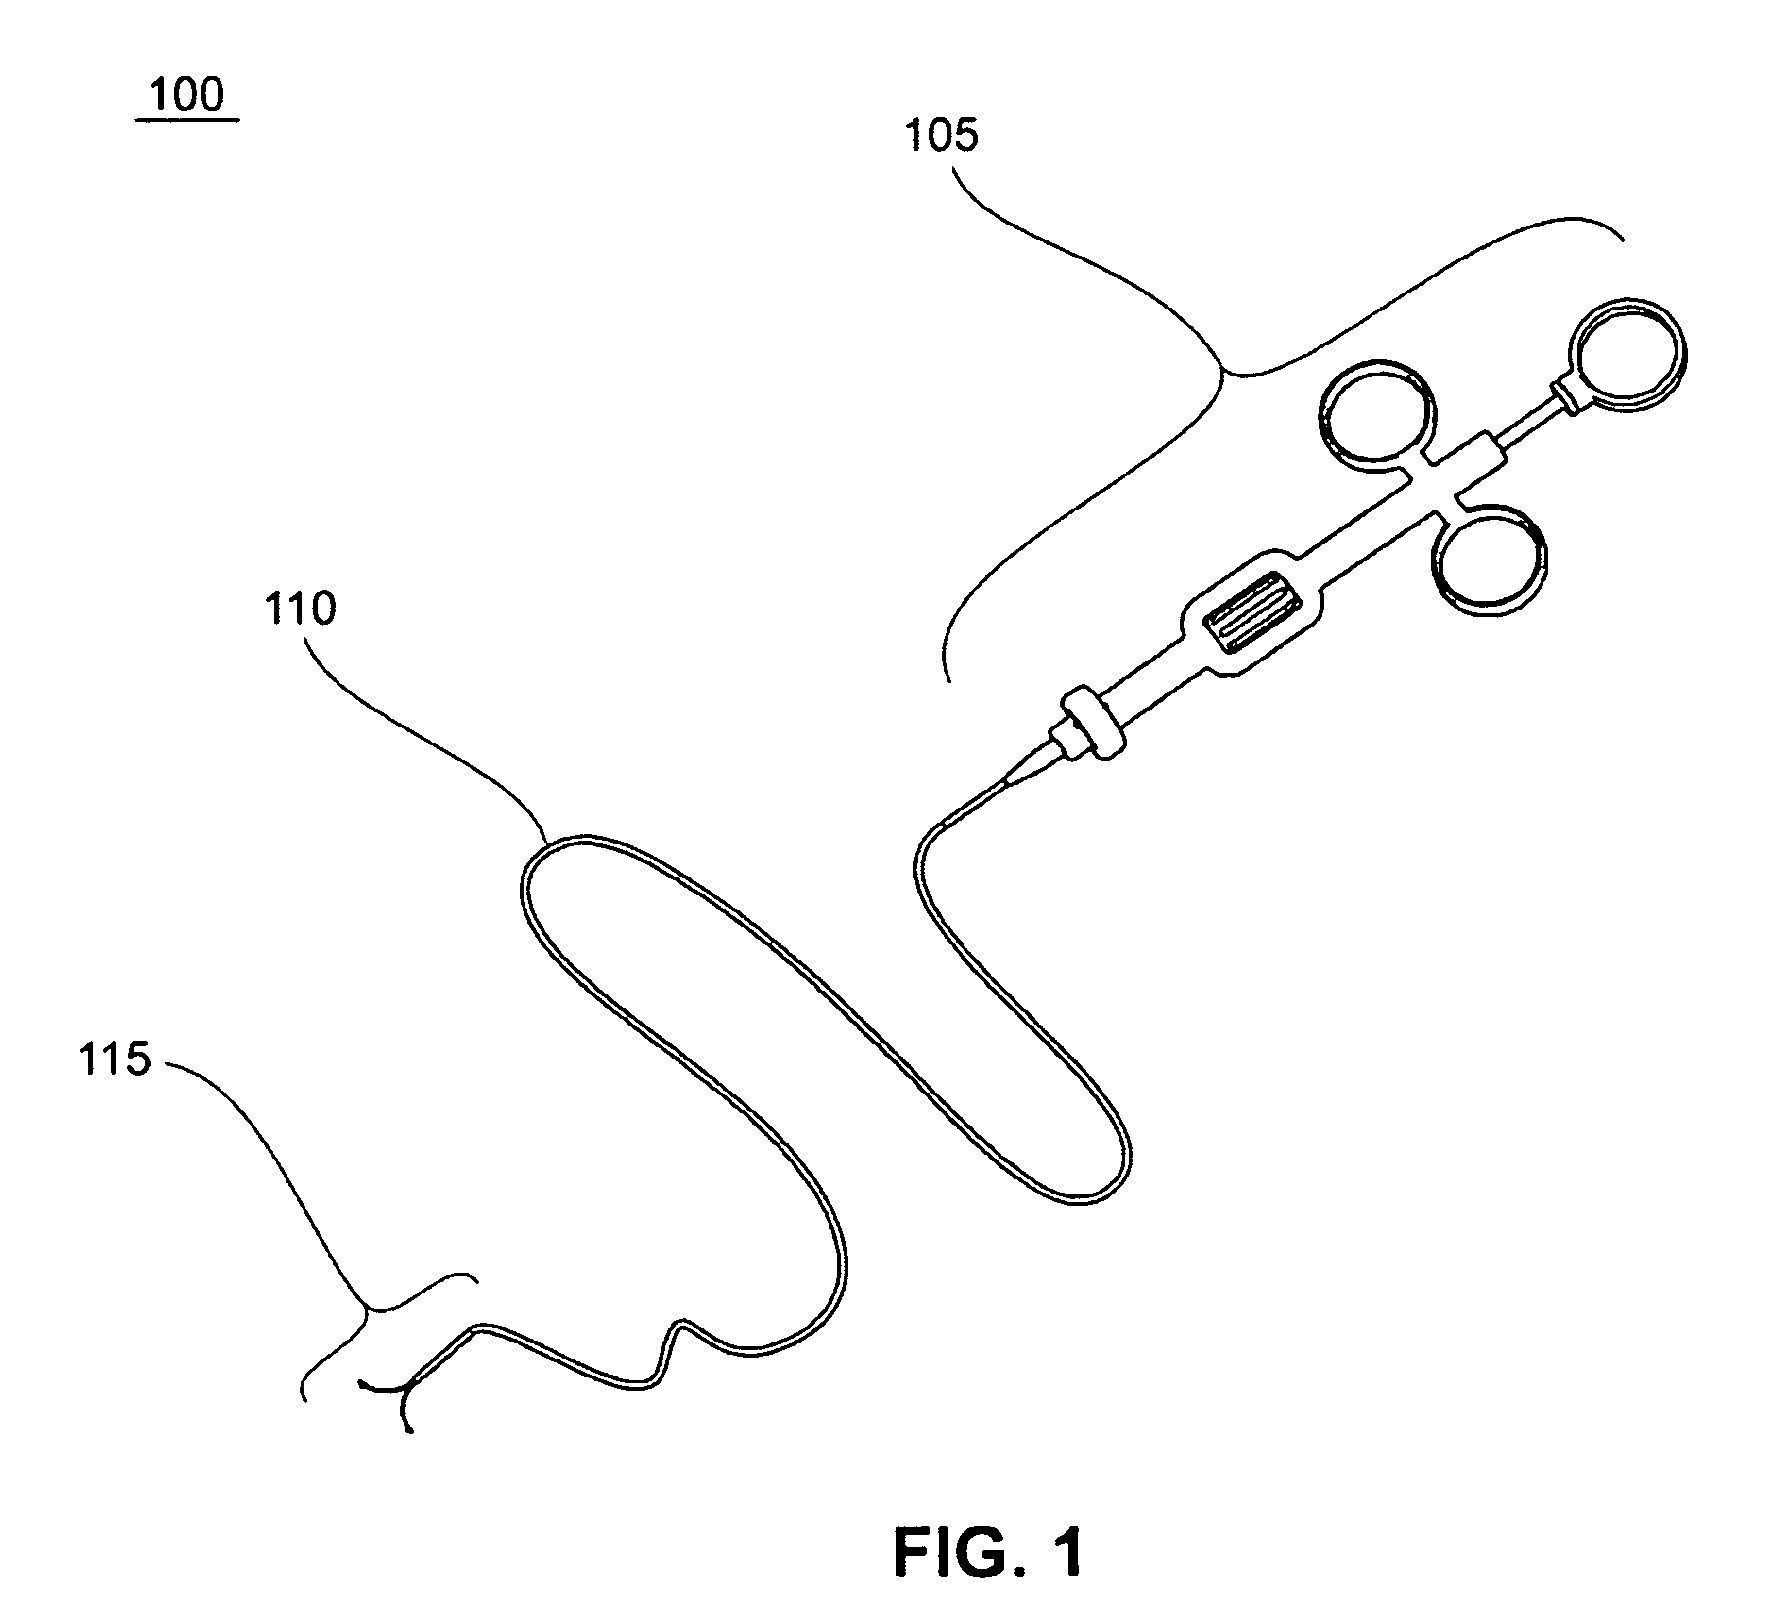 Methods for approximation and fastening of soft tissue